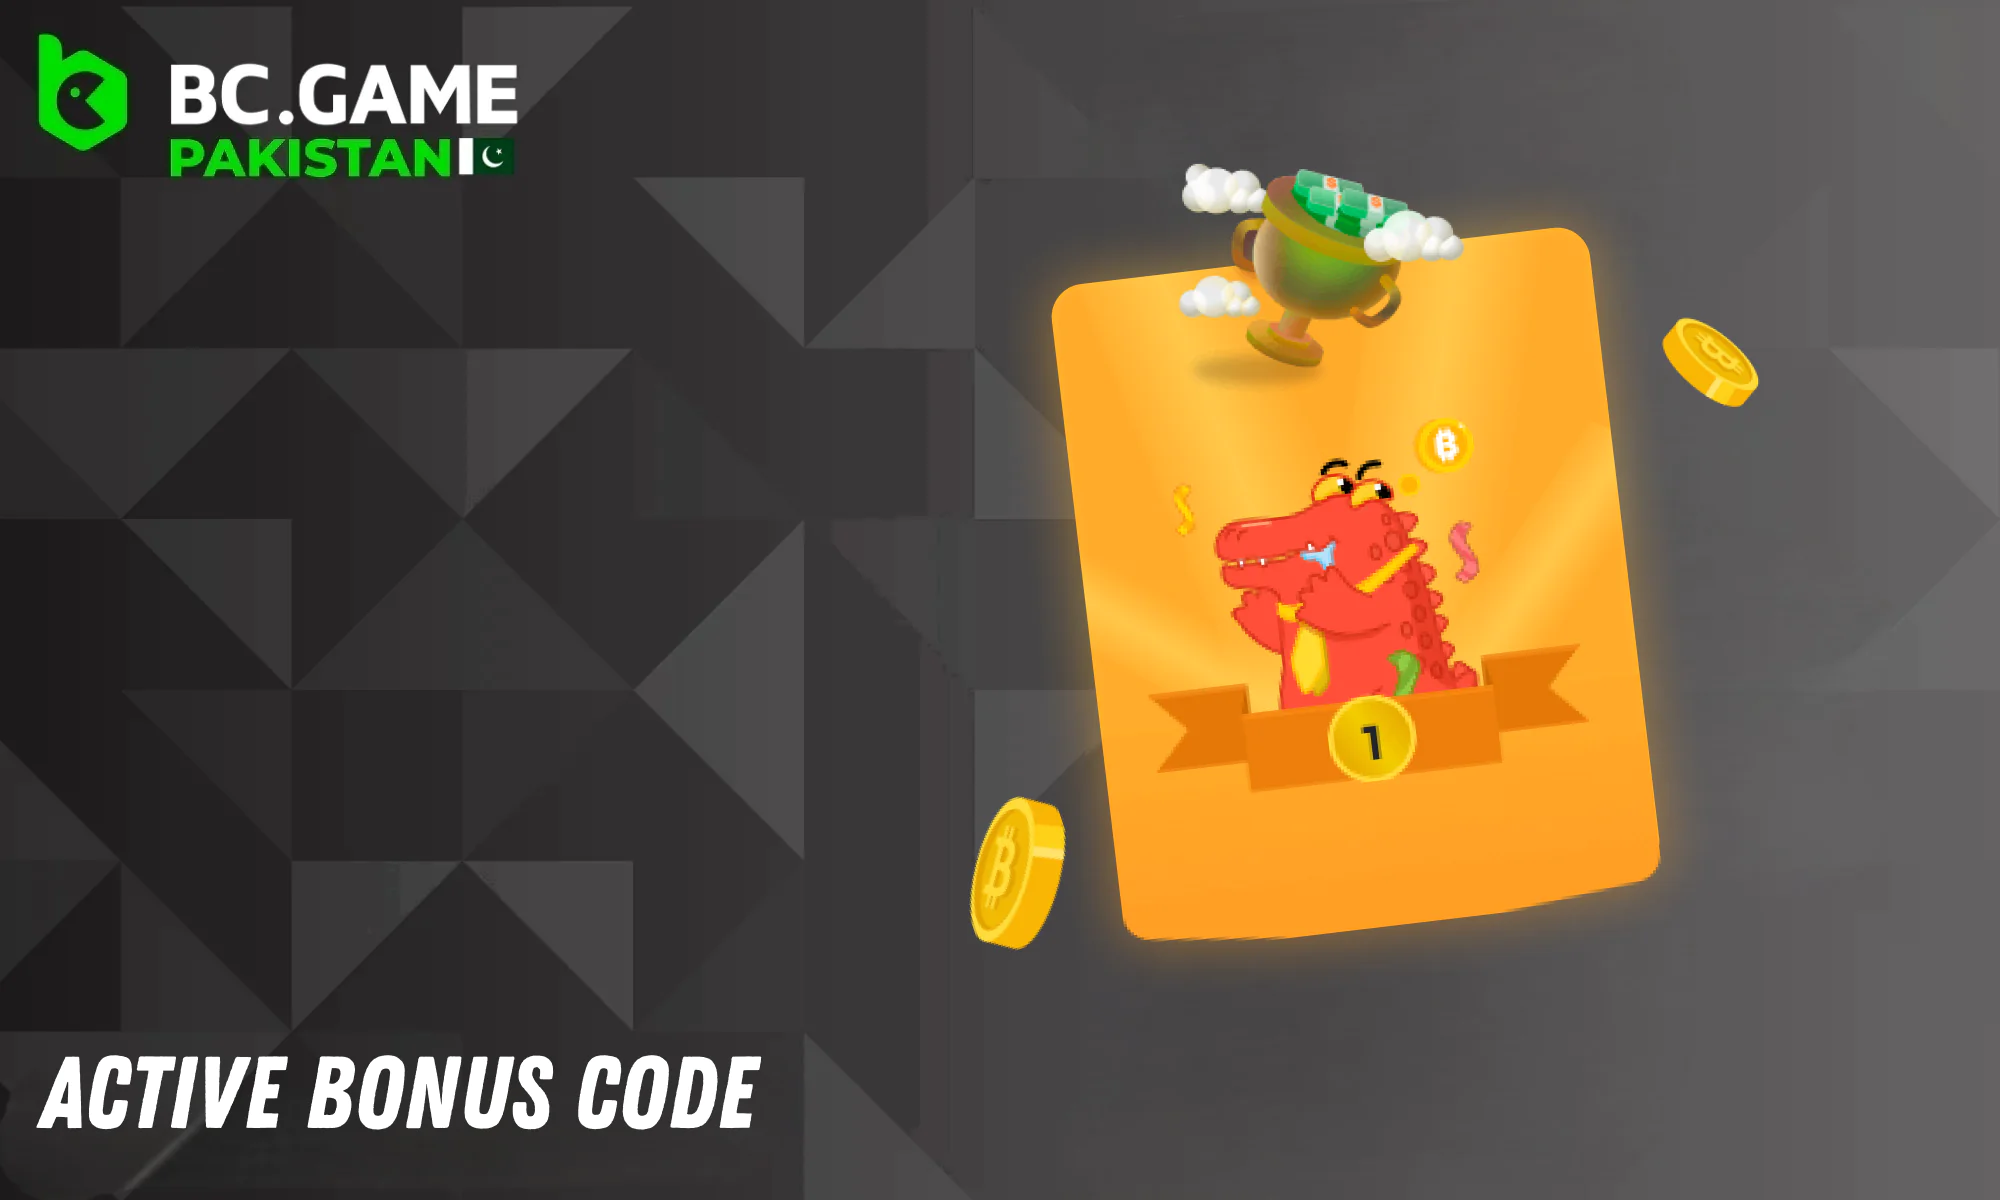 An active bonus code for BC Game provides users with special perks and rewards